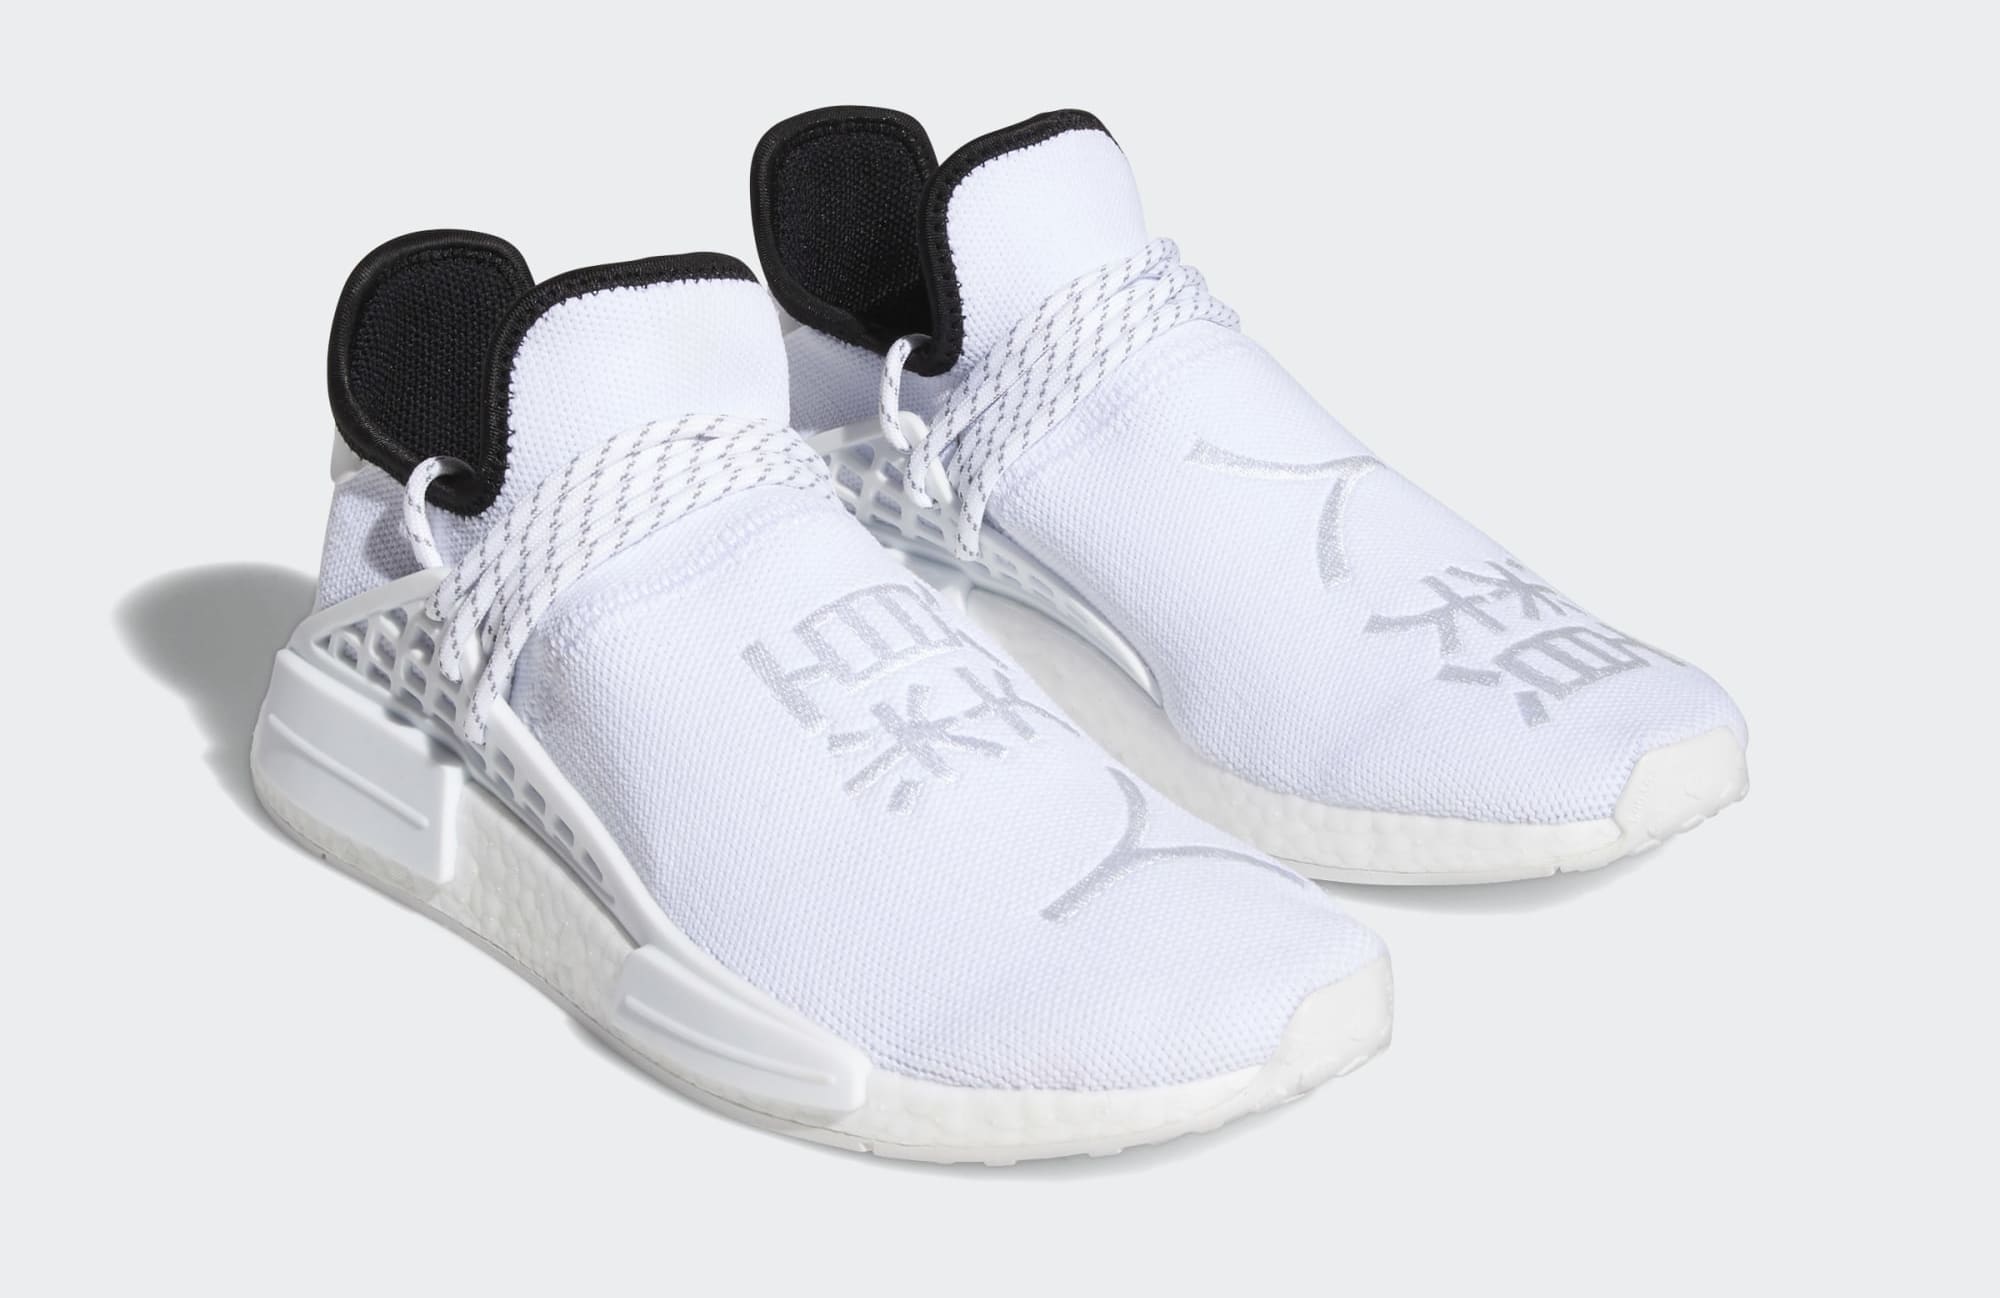 Explícito Resentimiento Fatídico Pharrell Williams x Adidas NMD Hu White GY0092 Release Date | Sole Collector